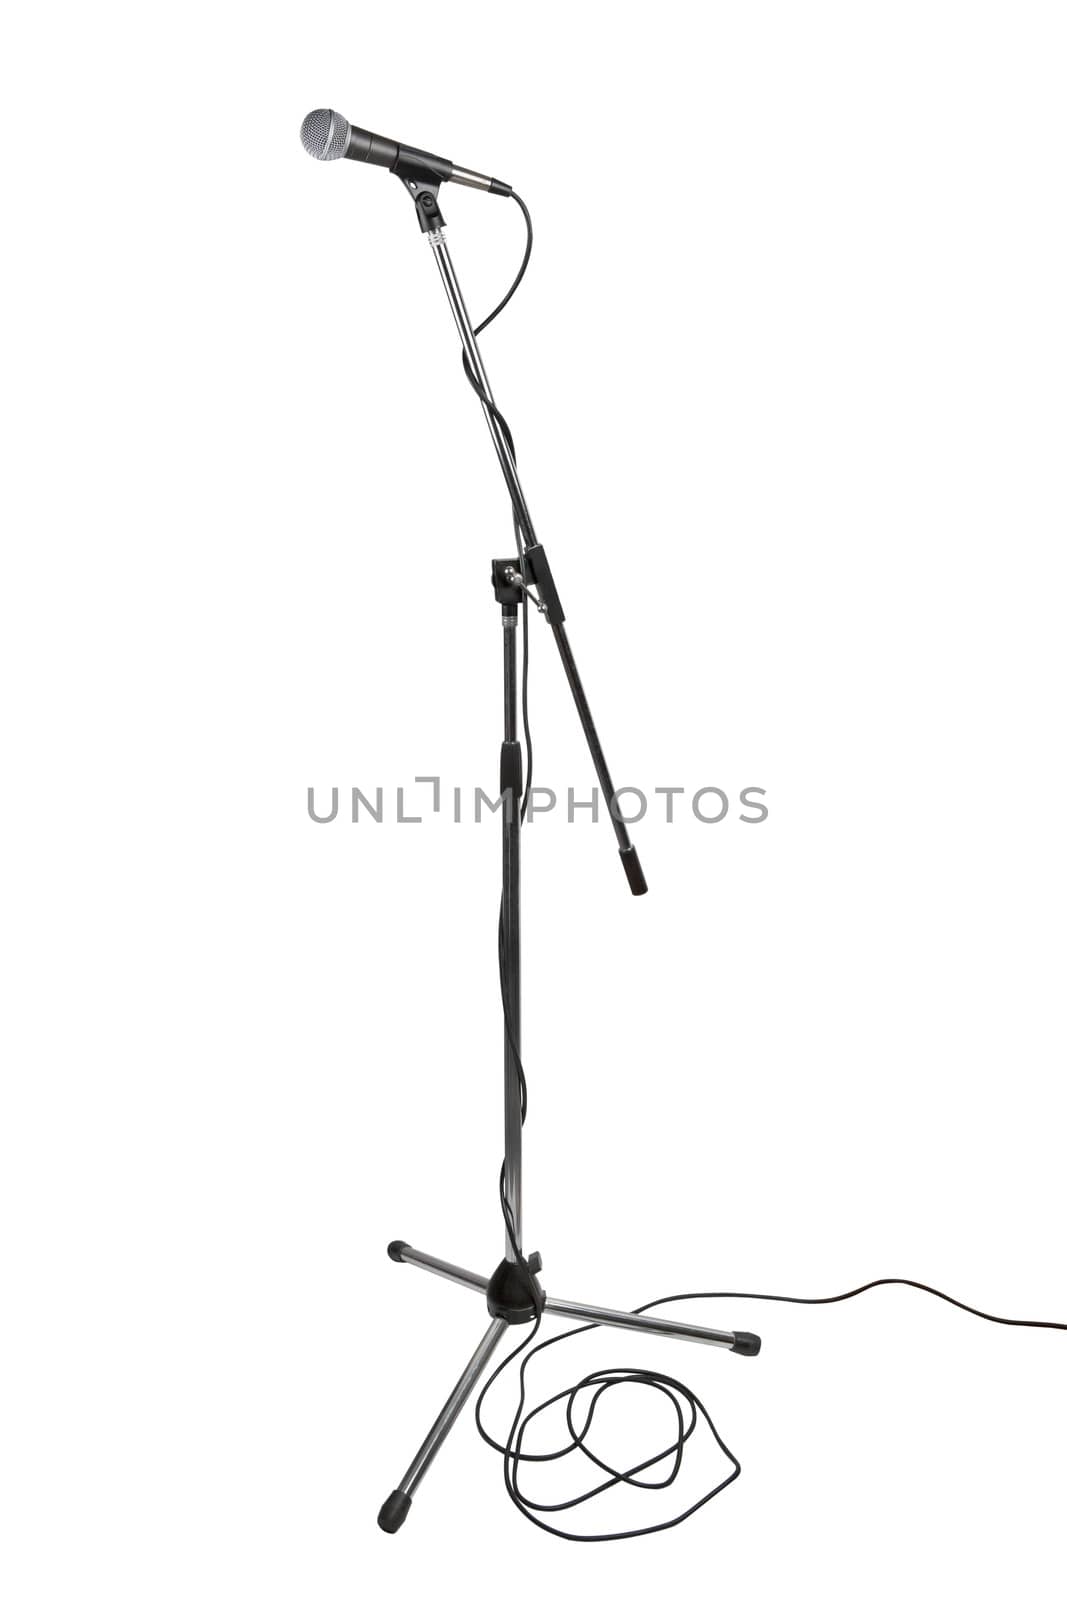 Microphone on stand isolated on white background